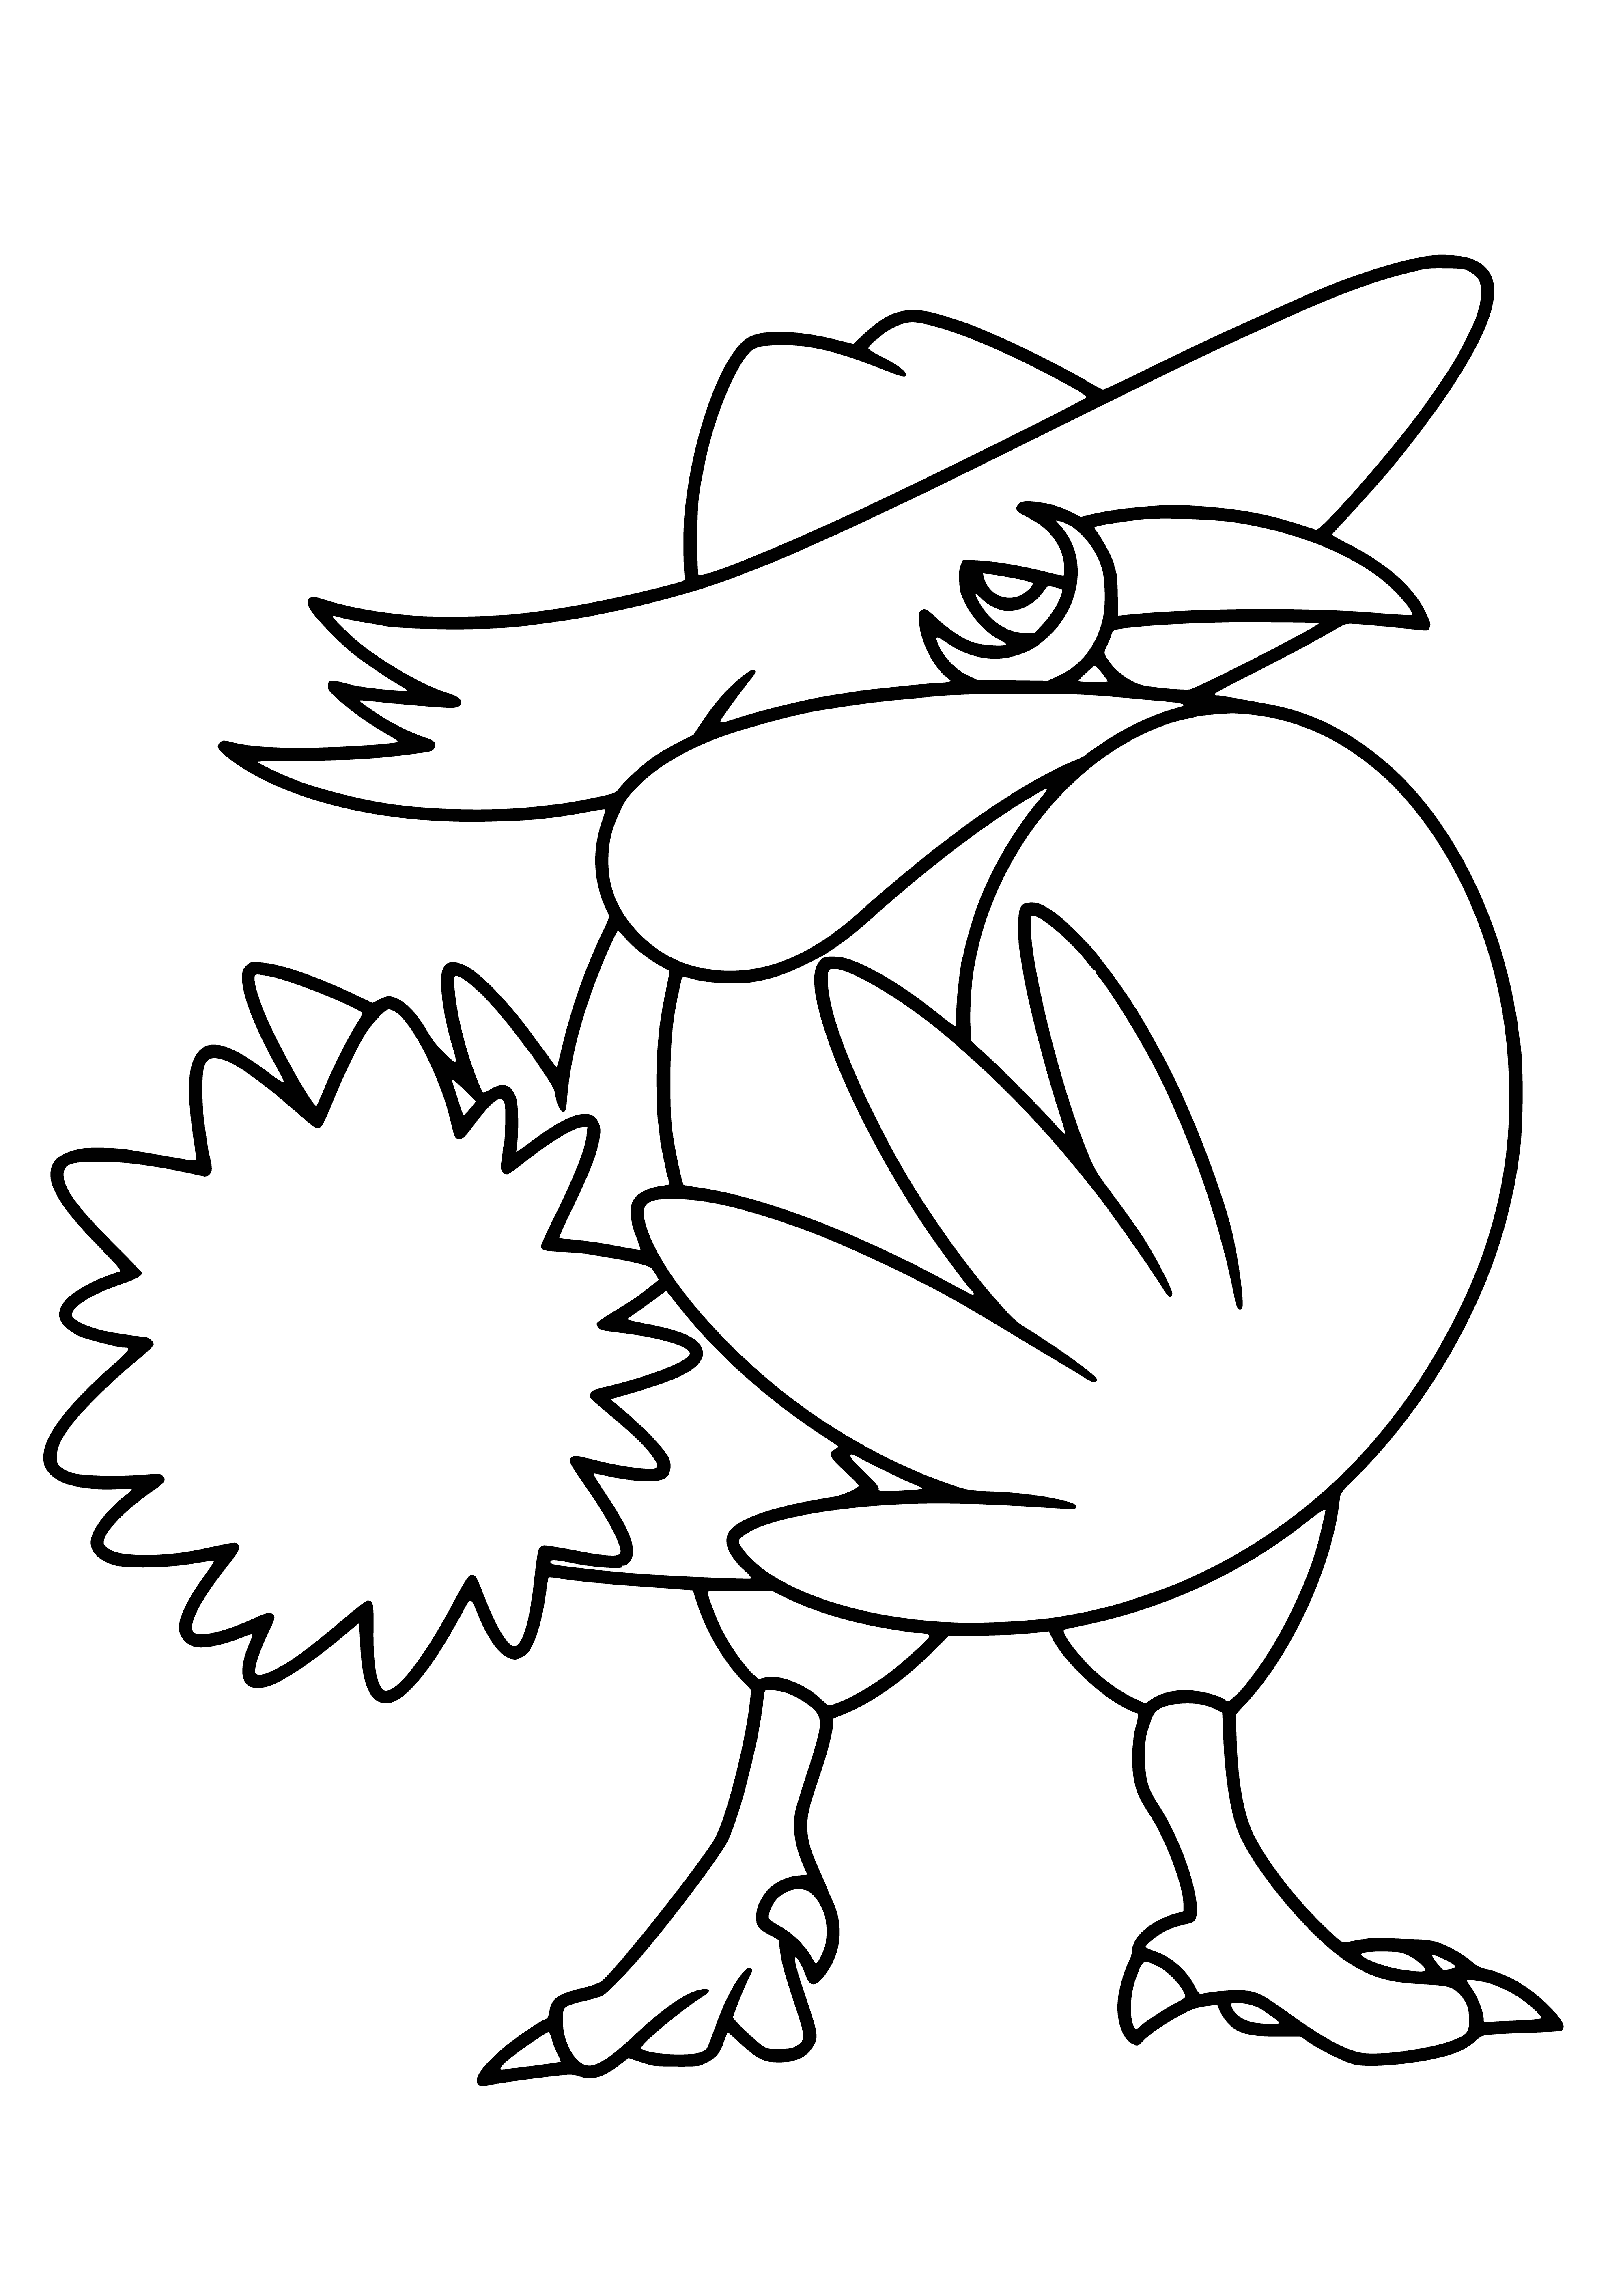 coloring page: Large black bird w/ red crest, hooked beak and red eyes; long black wings w/ red markings; small red feet.